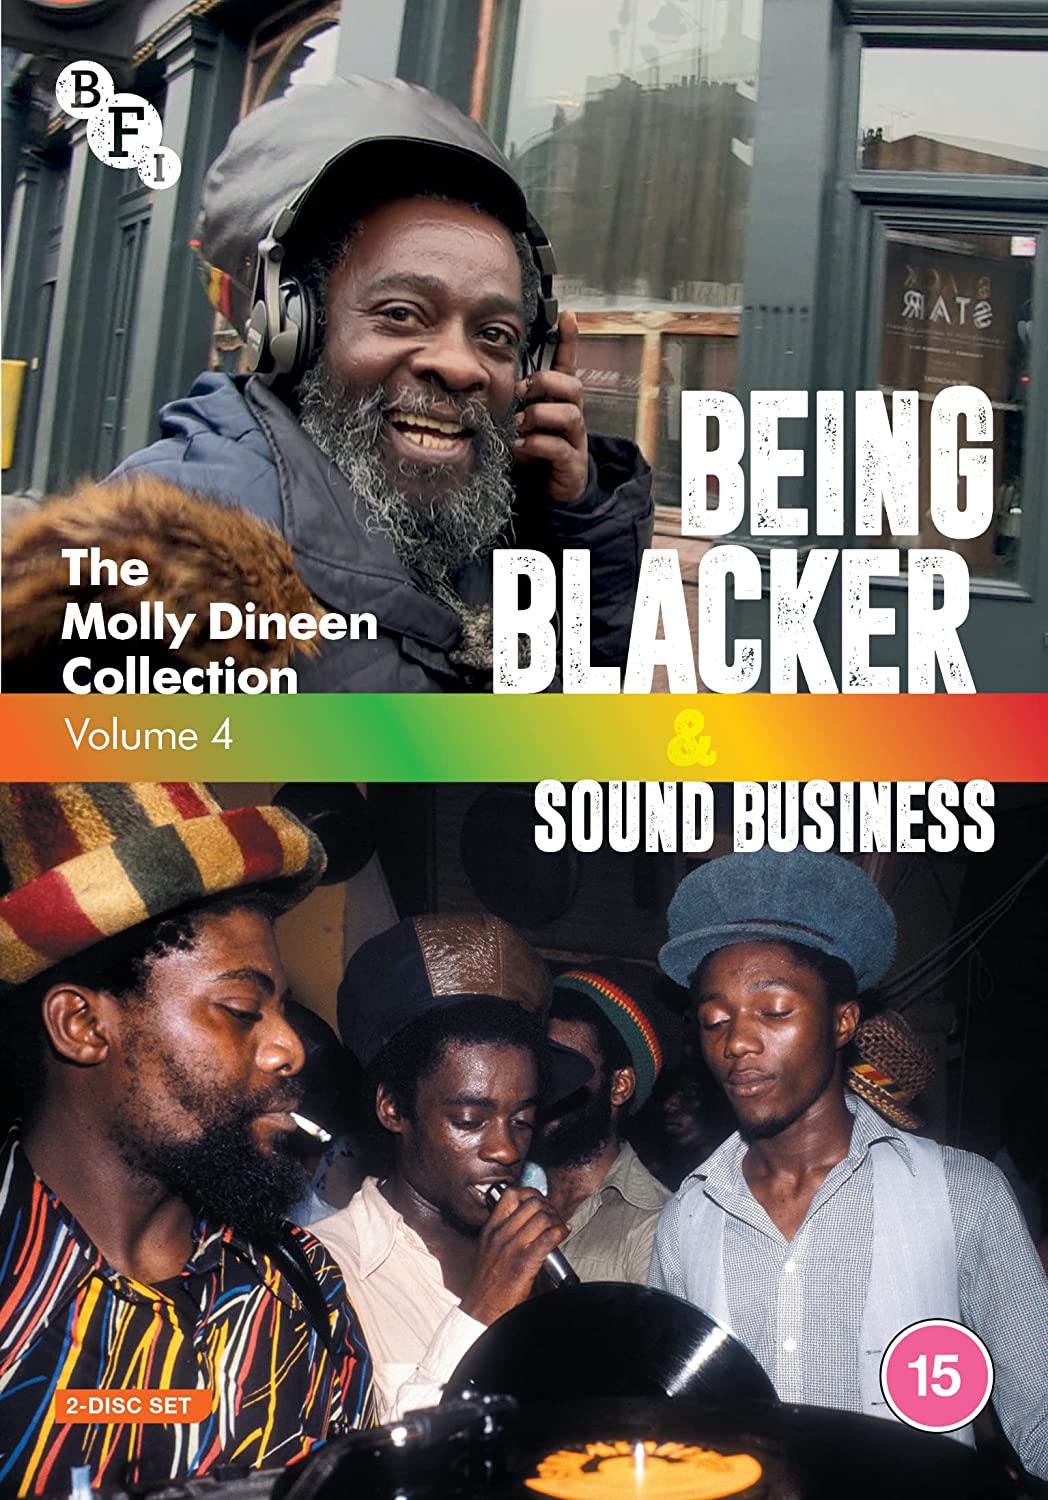 The Molly Dineen Collection Volume 4: Being Blacker / Sound Business [DVD]